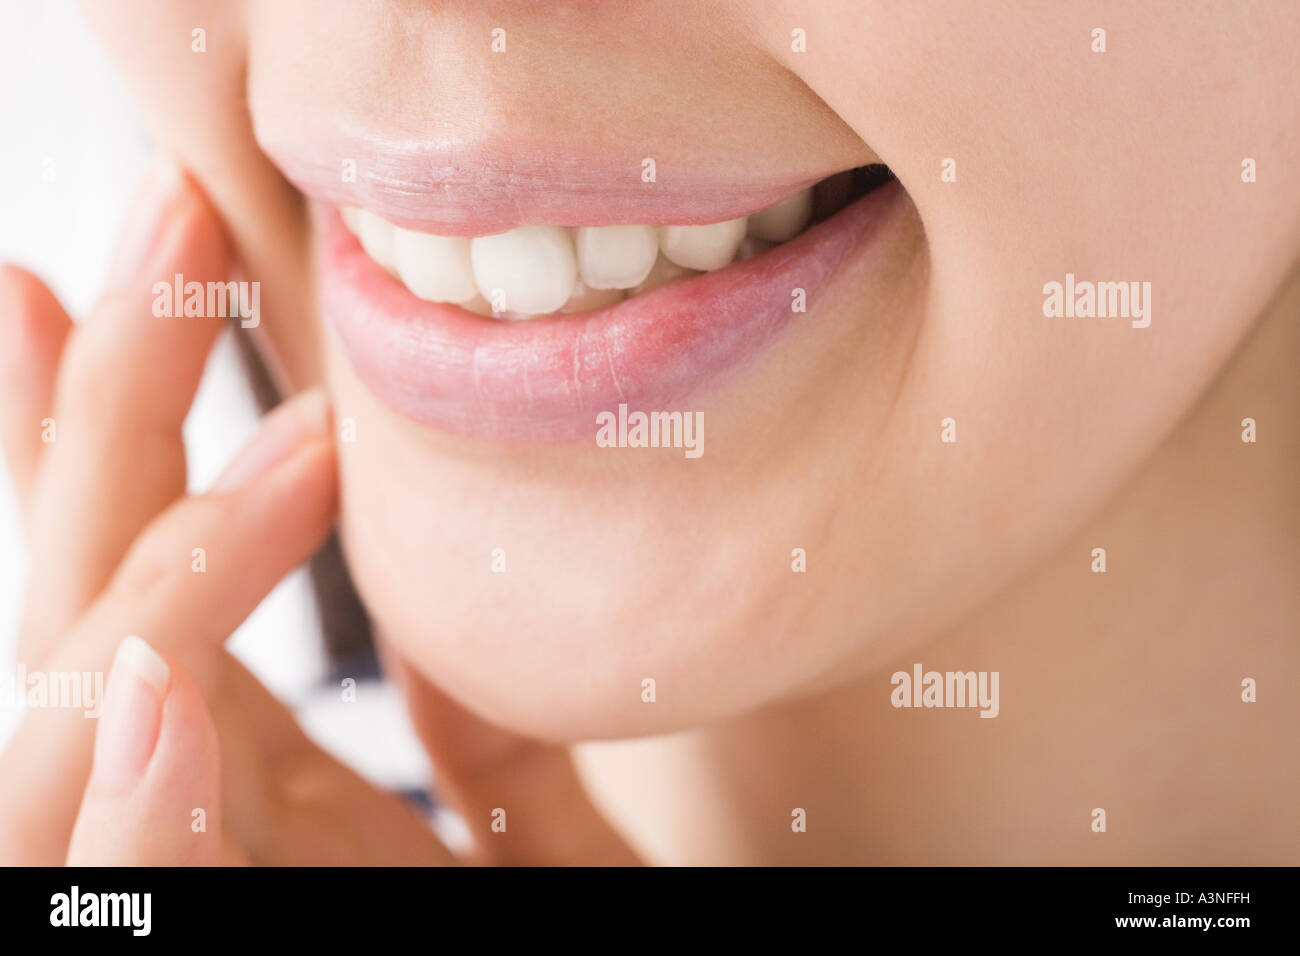 Close-up of woman's mouth Stock Photo